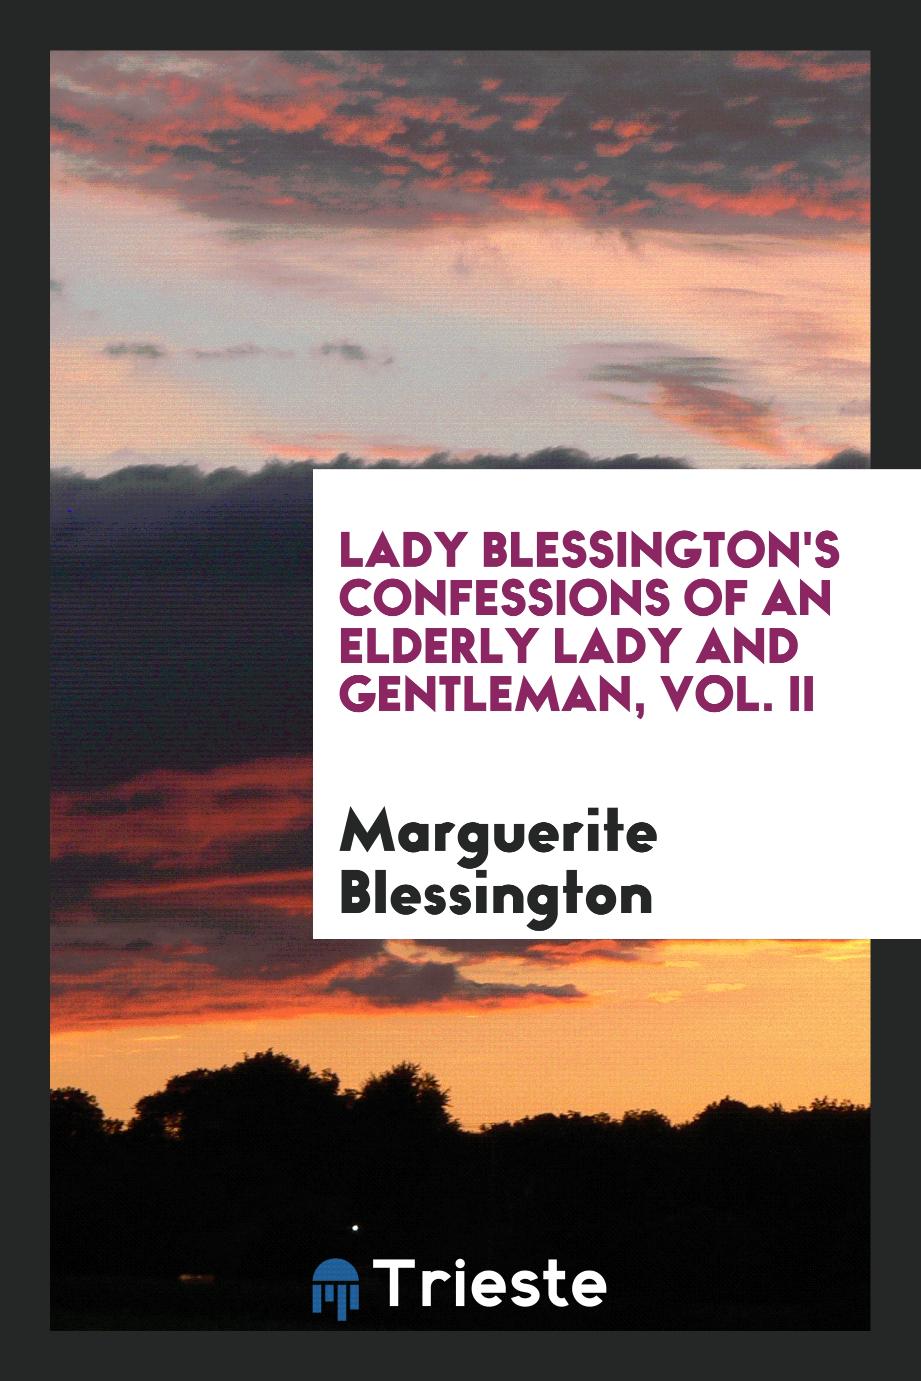 Lady Blessington's Confessions of an elderly lady and gentleman, Vol. II